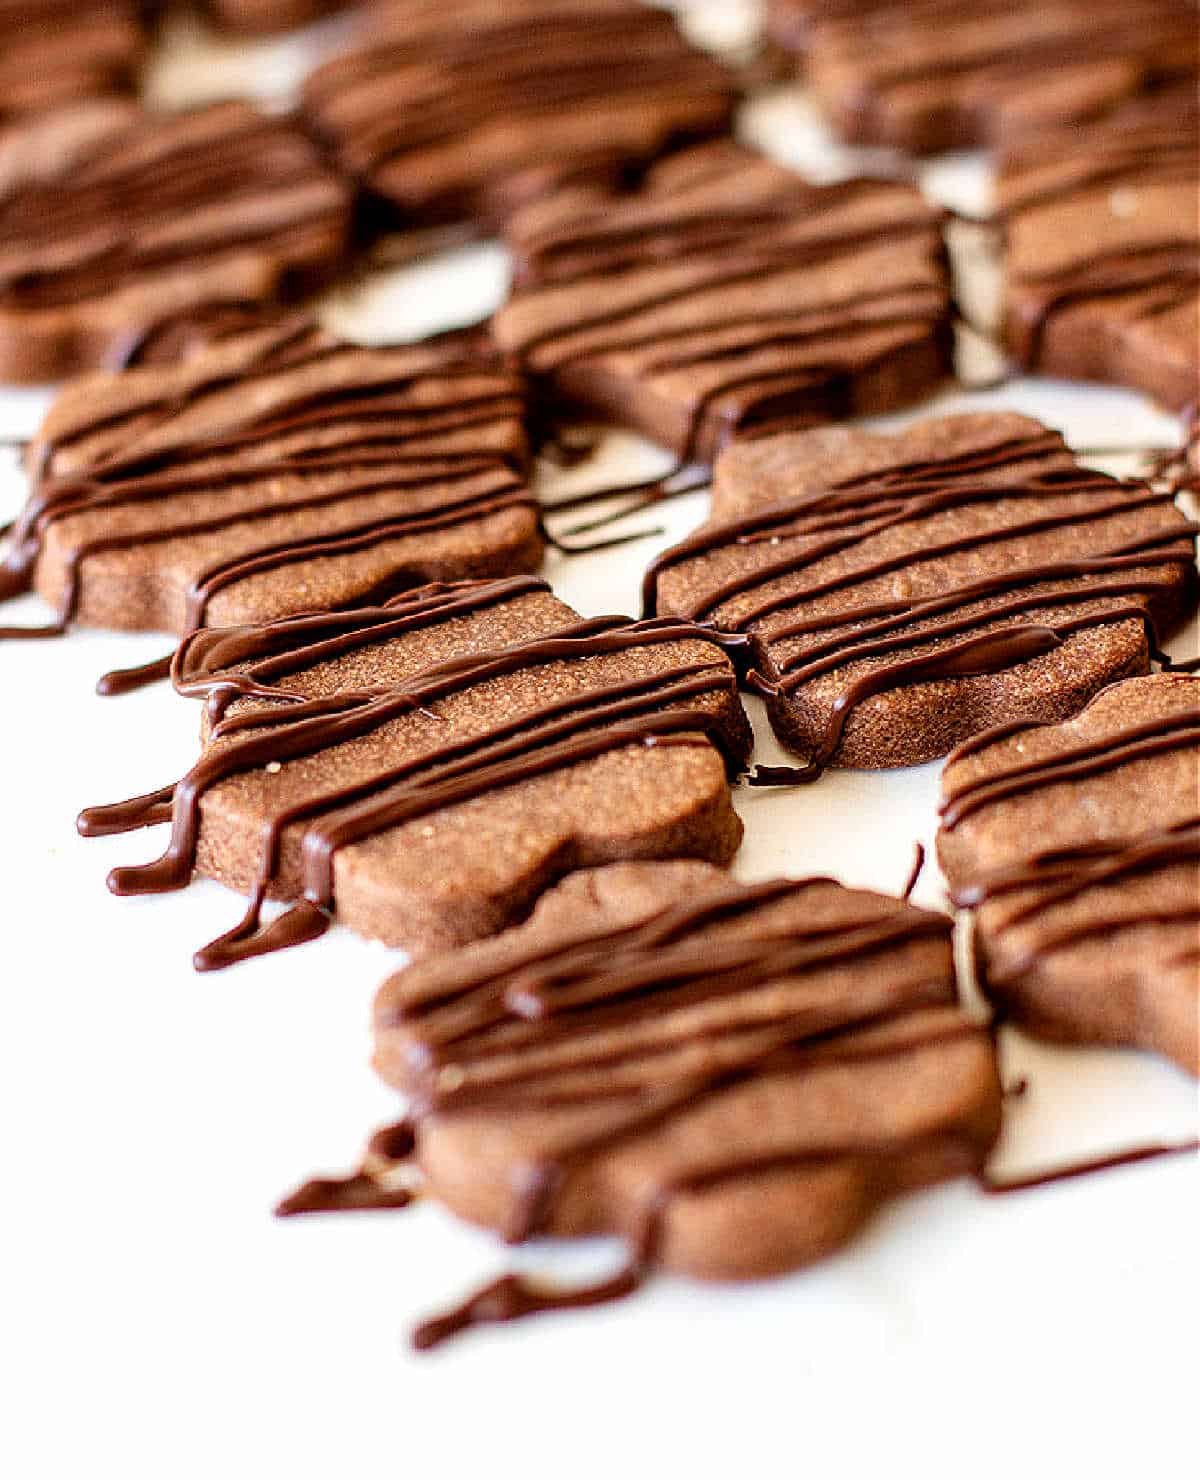 Rows of flower-shaped chocolate cookies topped with chocolate threads on white surface.